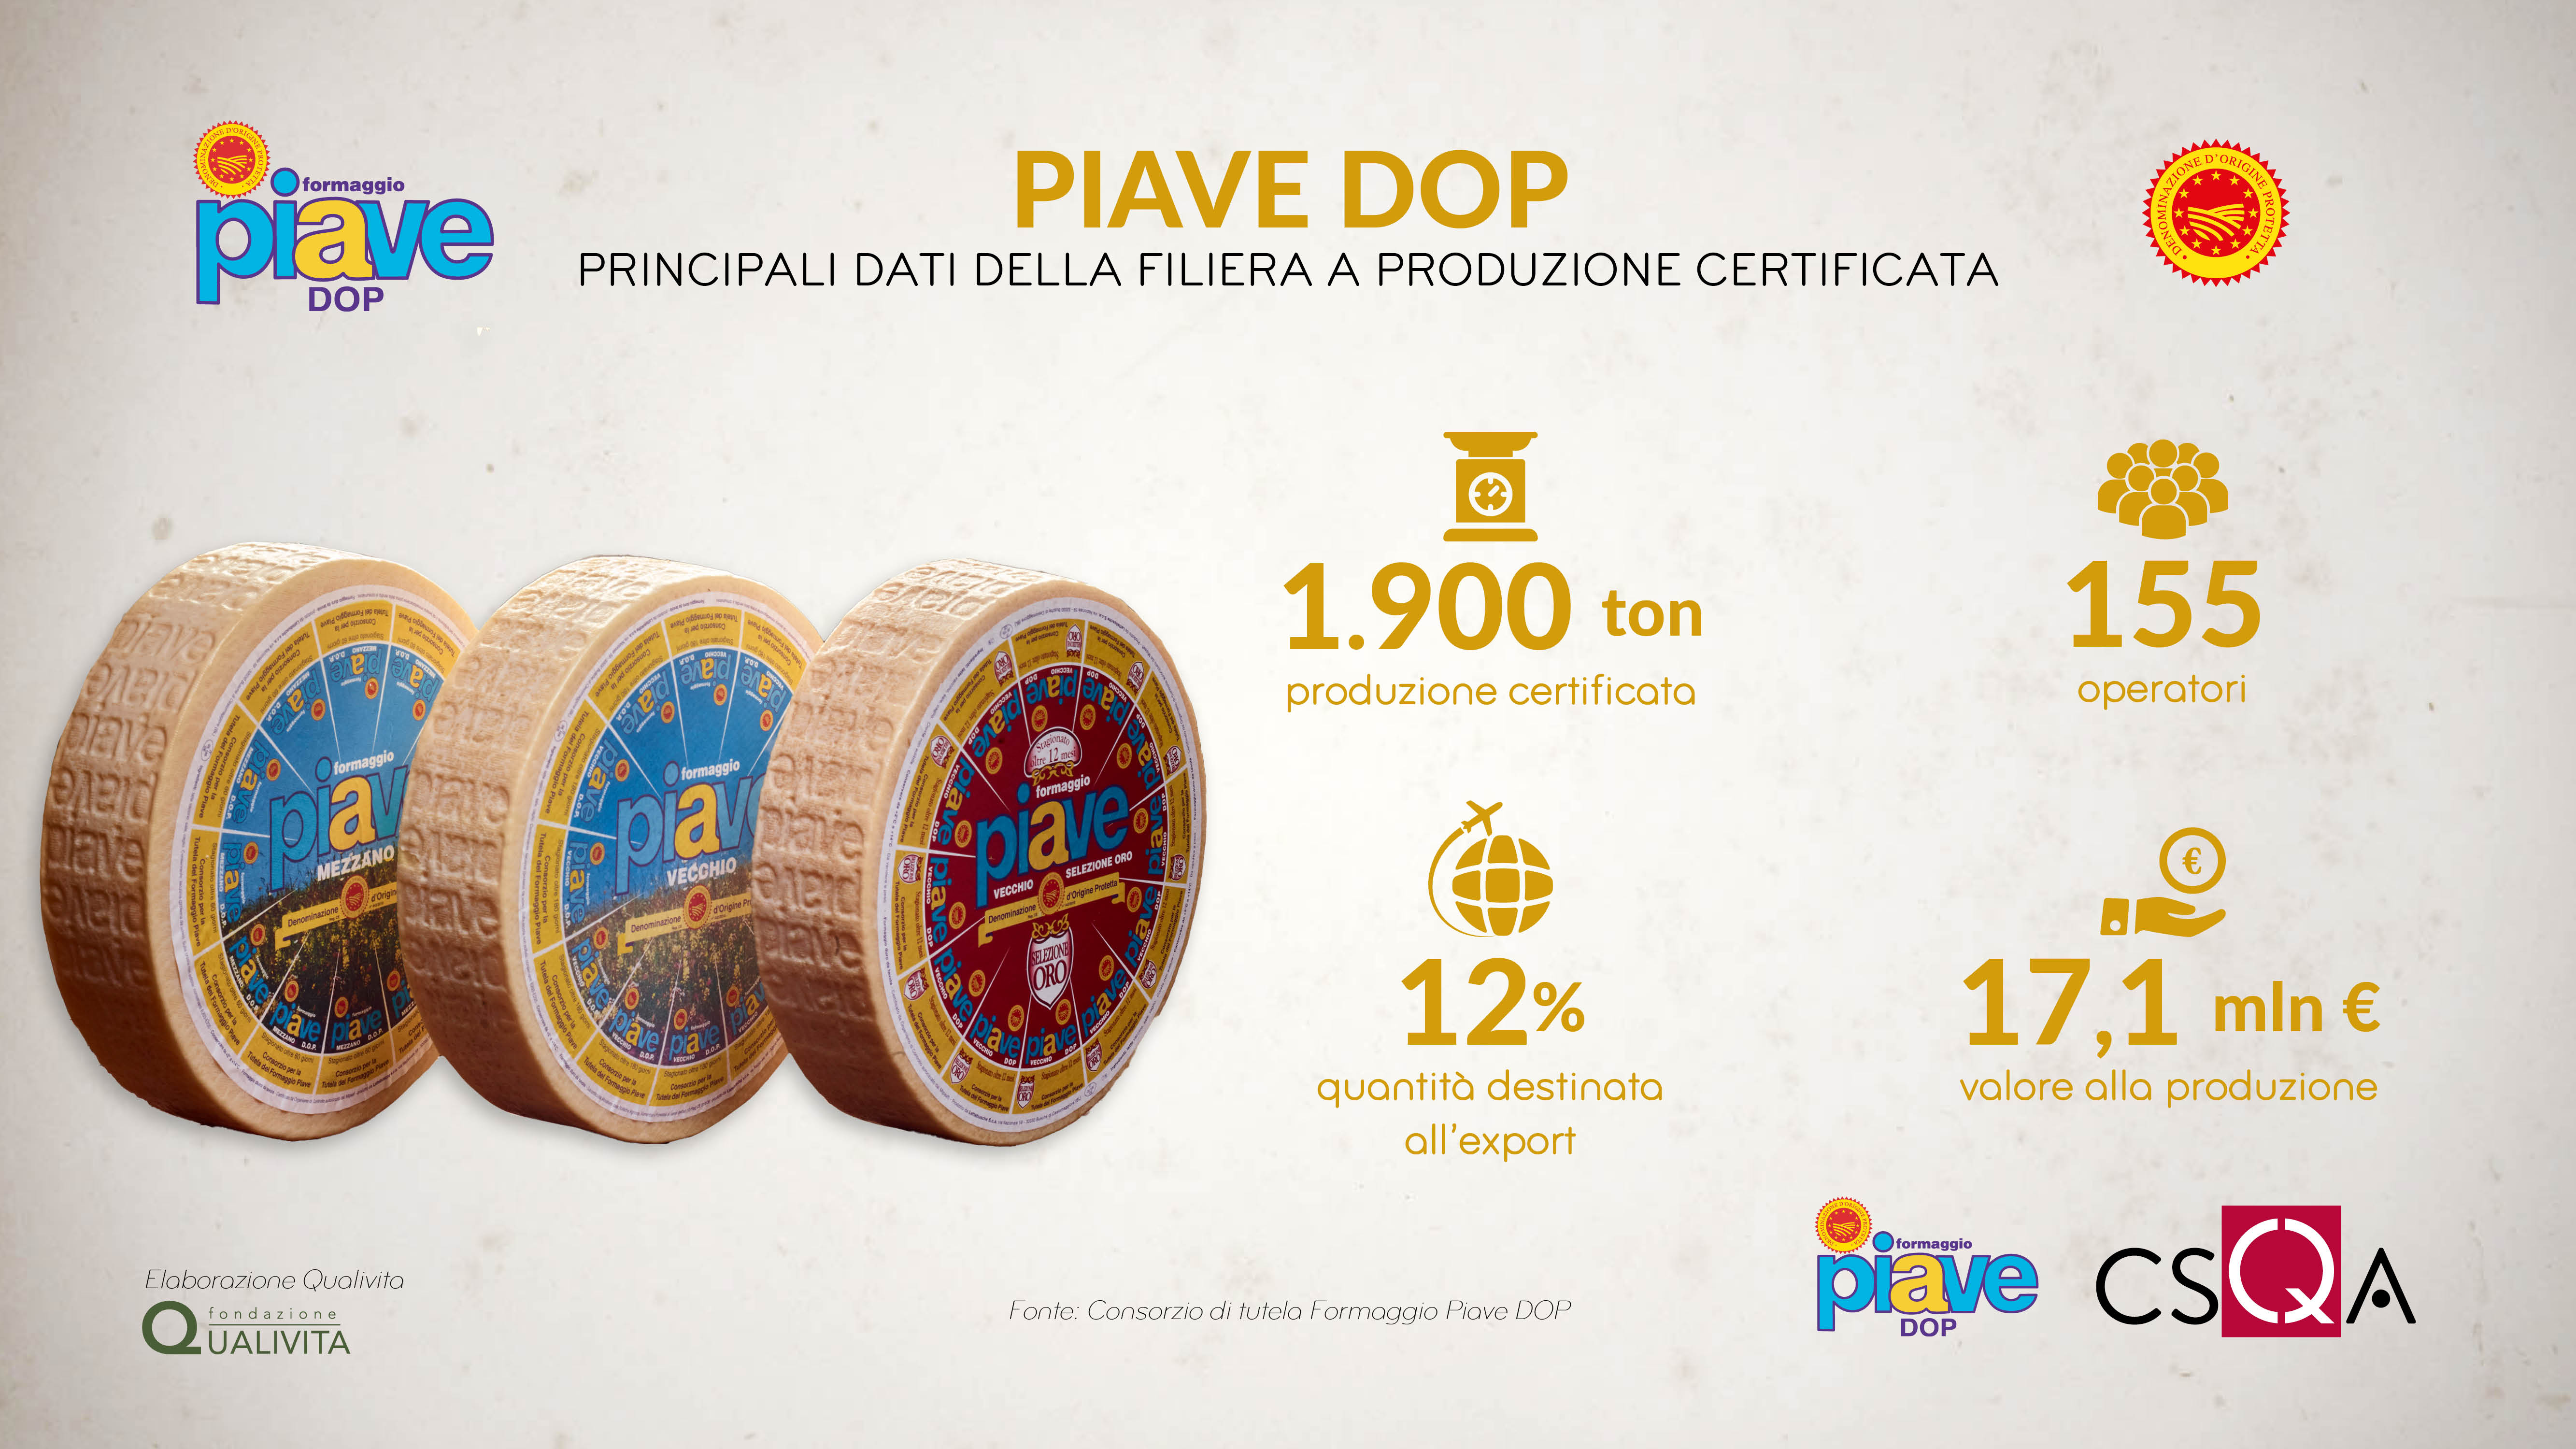 Piave PDO, a 17 million supply chain from the Belluno Dolomites